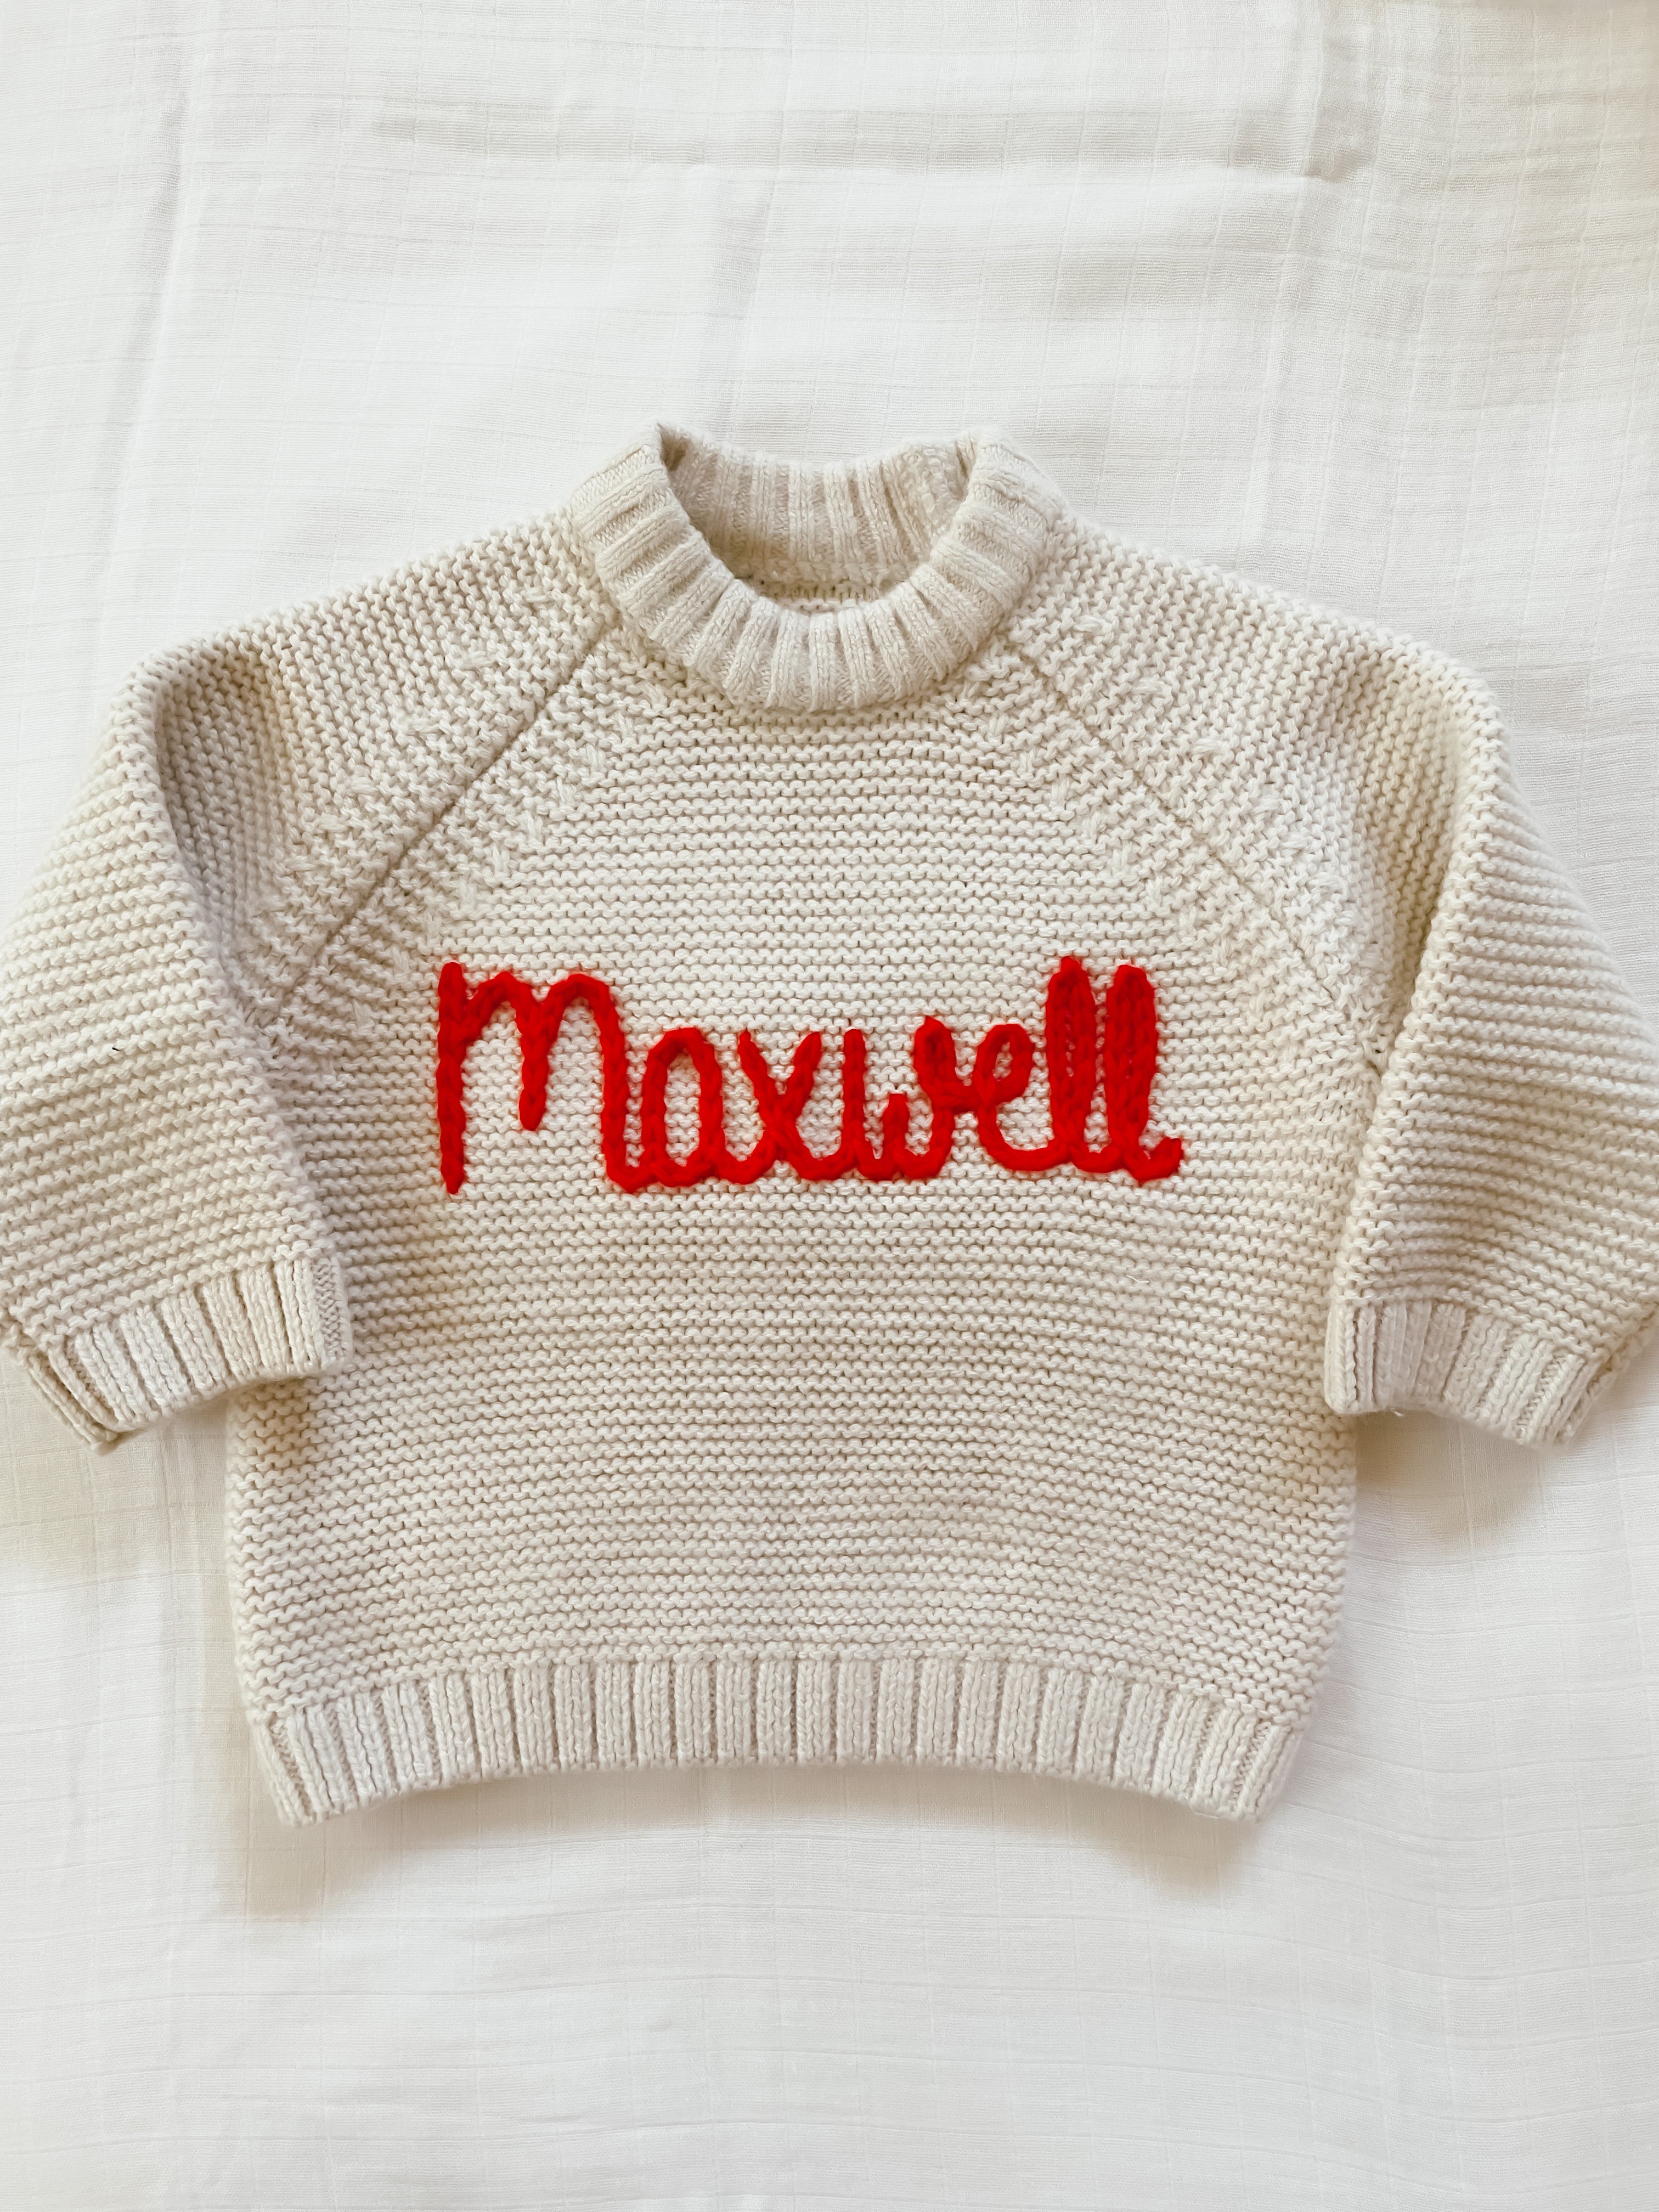 Bespoke Baby + Toddler Sweaters *6-9 Months Only*